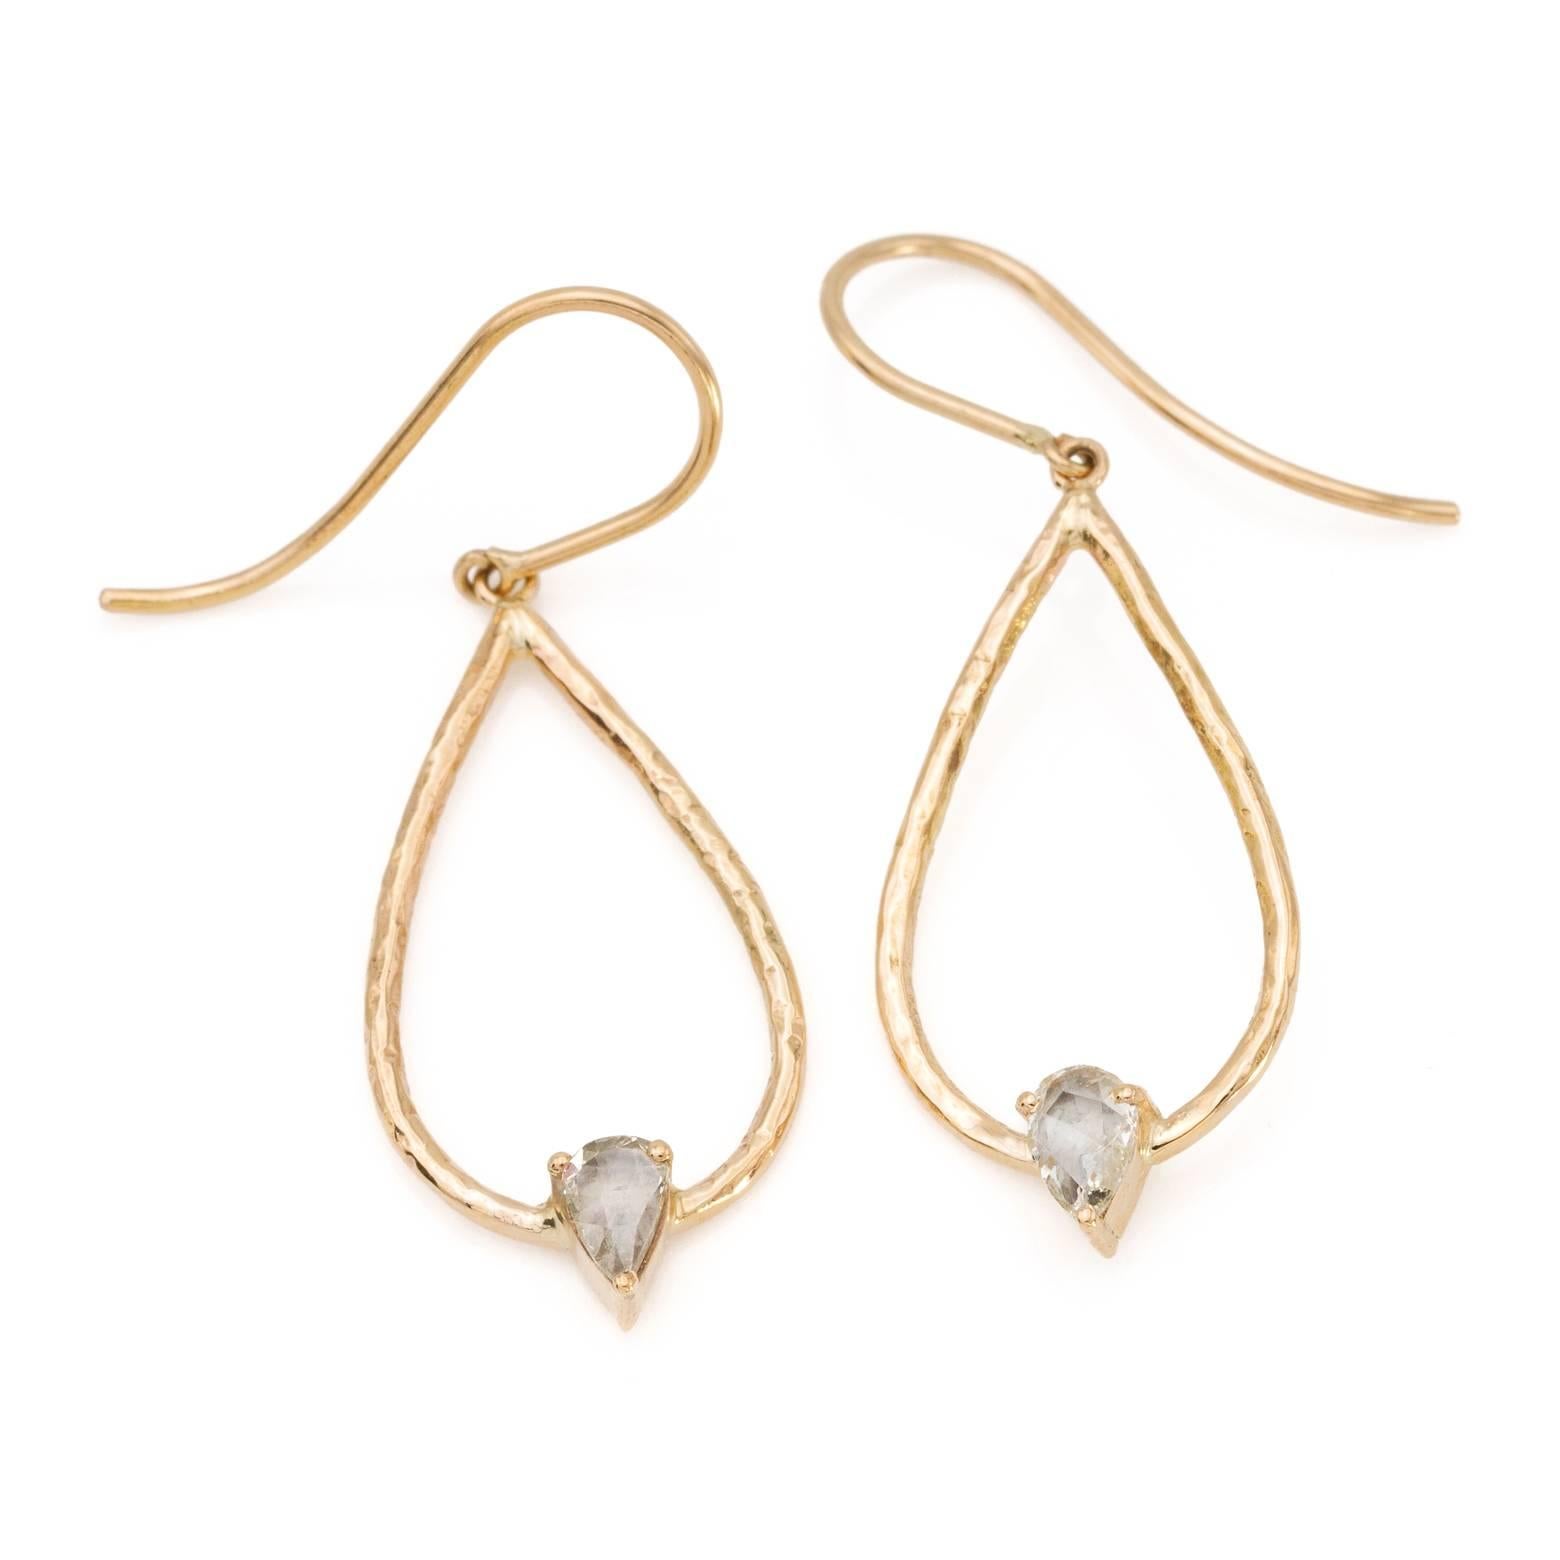 These simple and elegant diamond drop earrings are perfect for everyday or for day to evening. The Rose cut diamonds are suspended on a 'trapeze' style teardrop that has a beautiful texture in 18k gold. 